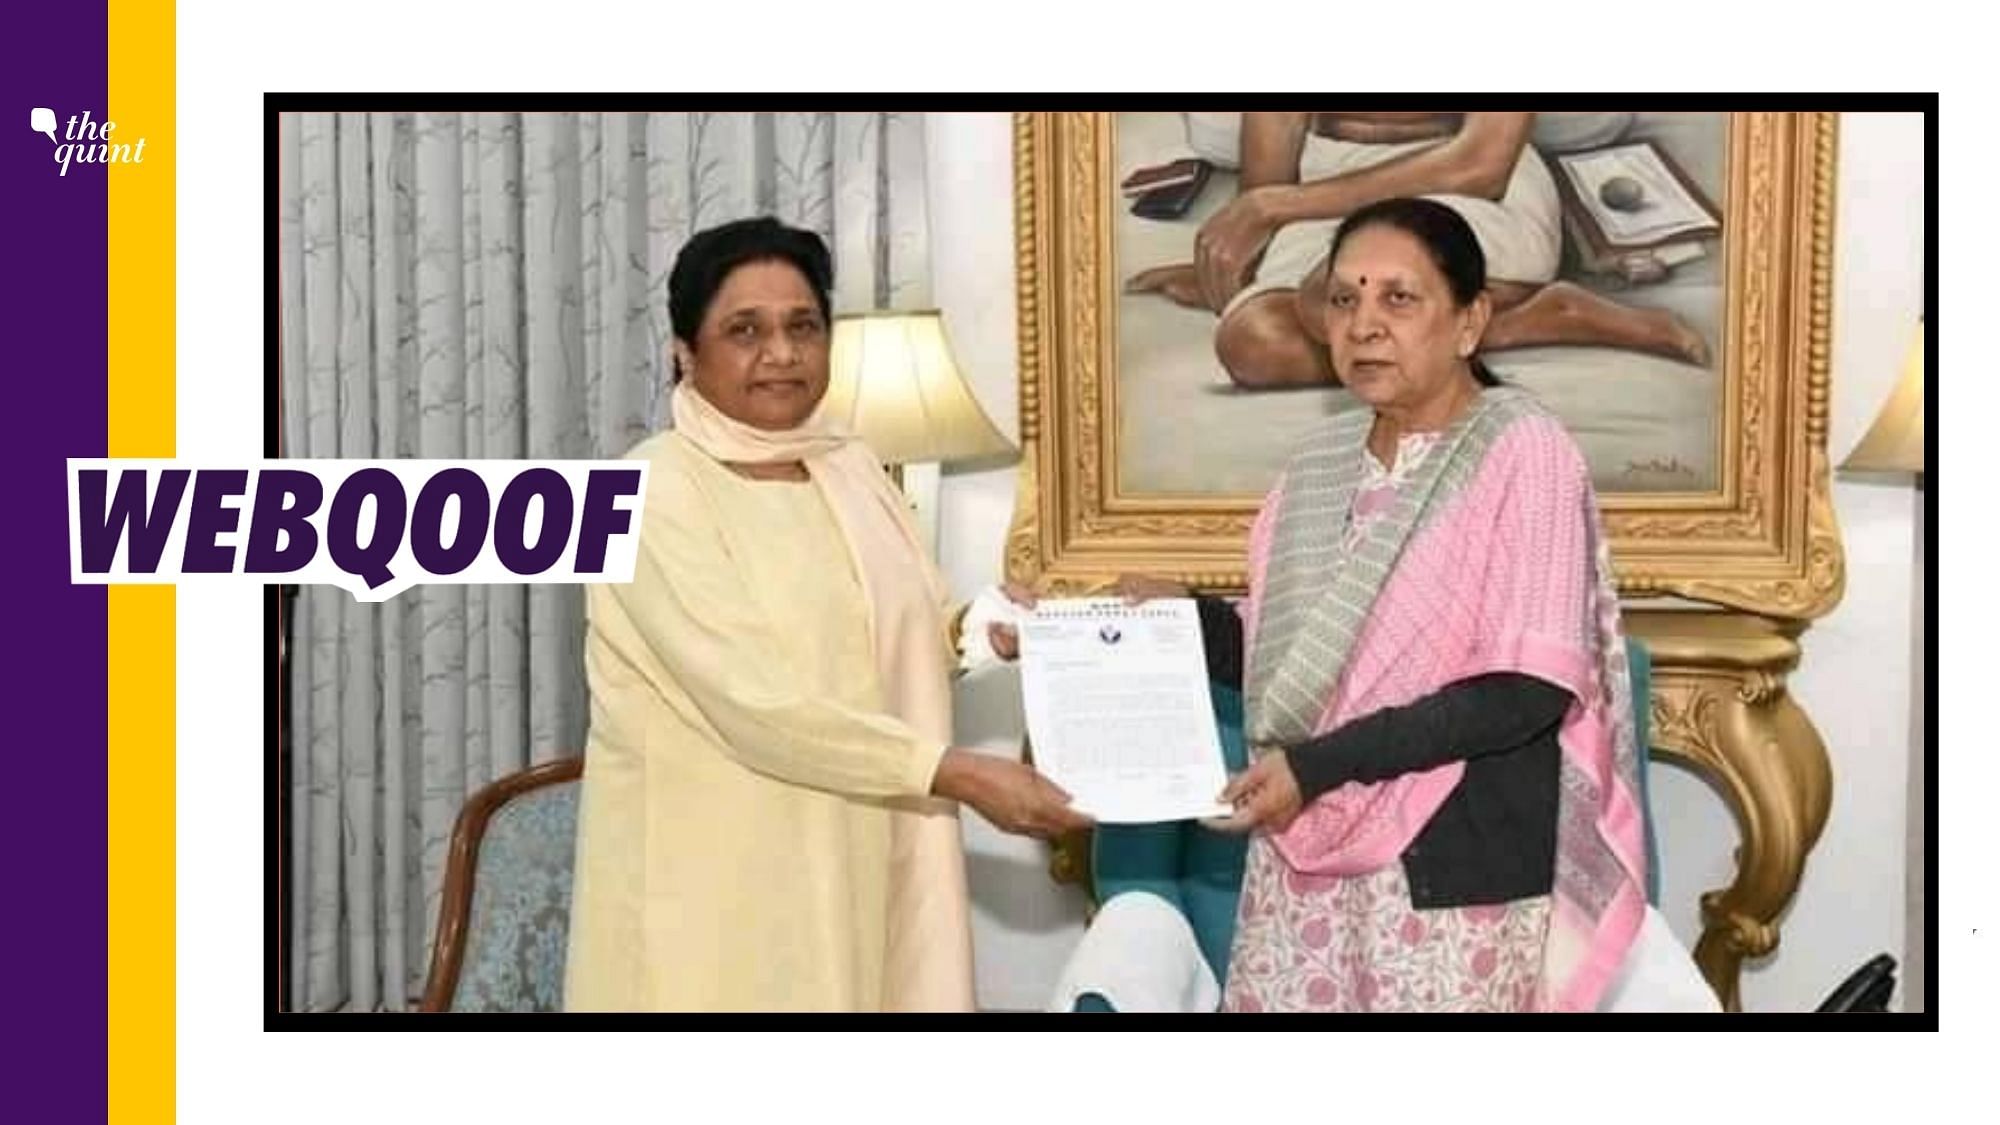 The image is from 2019 when the BSP chief met Patel and urged her to tackle the issue of rising crime against women.